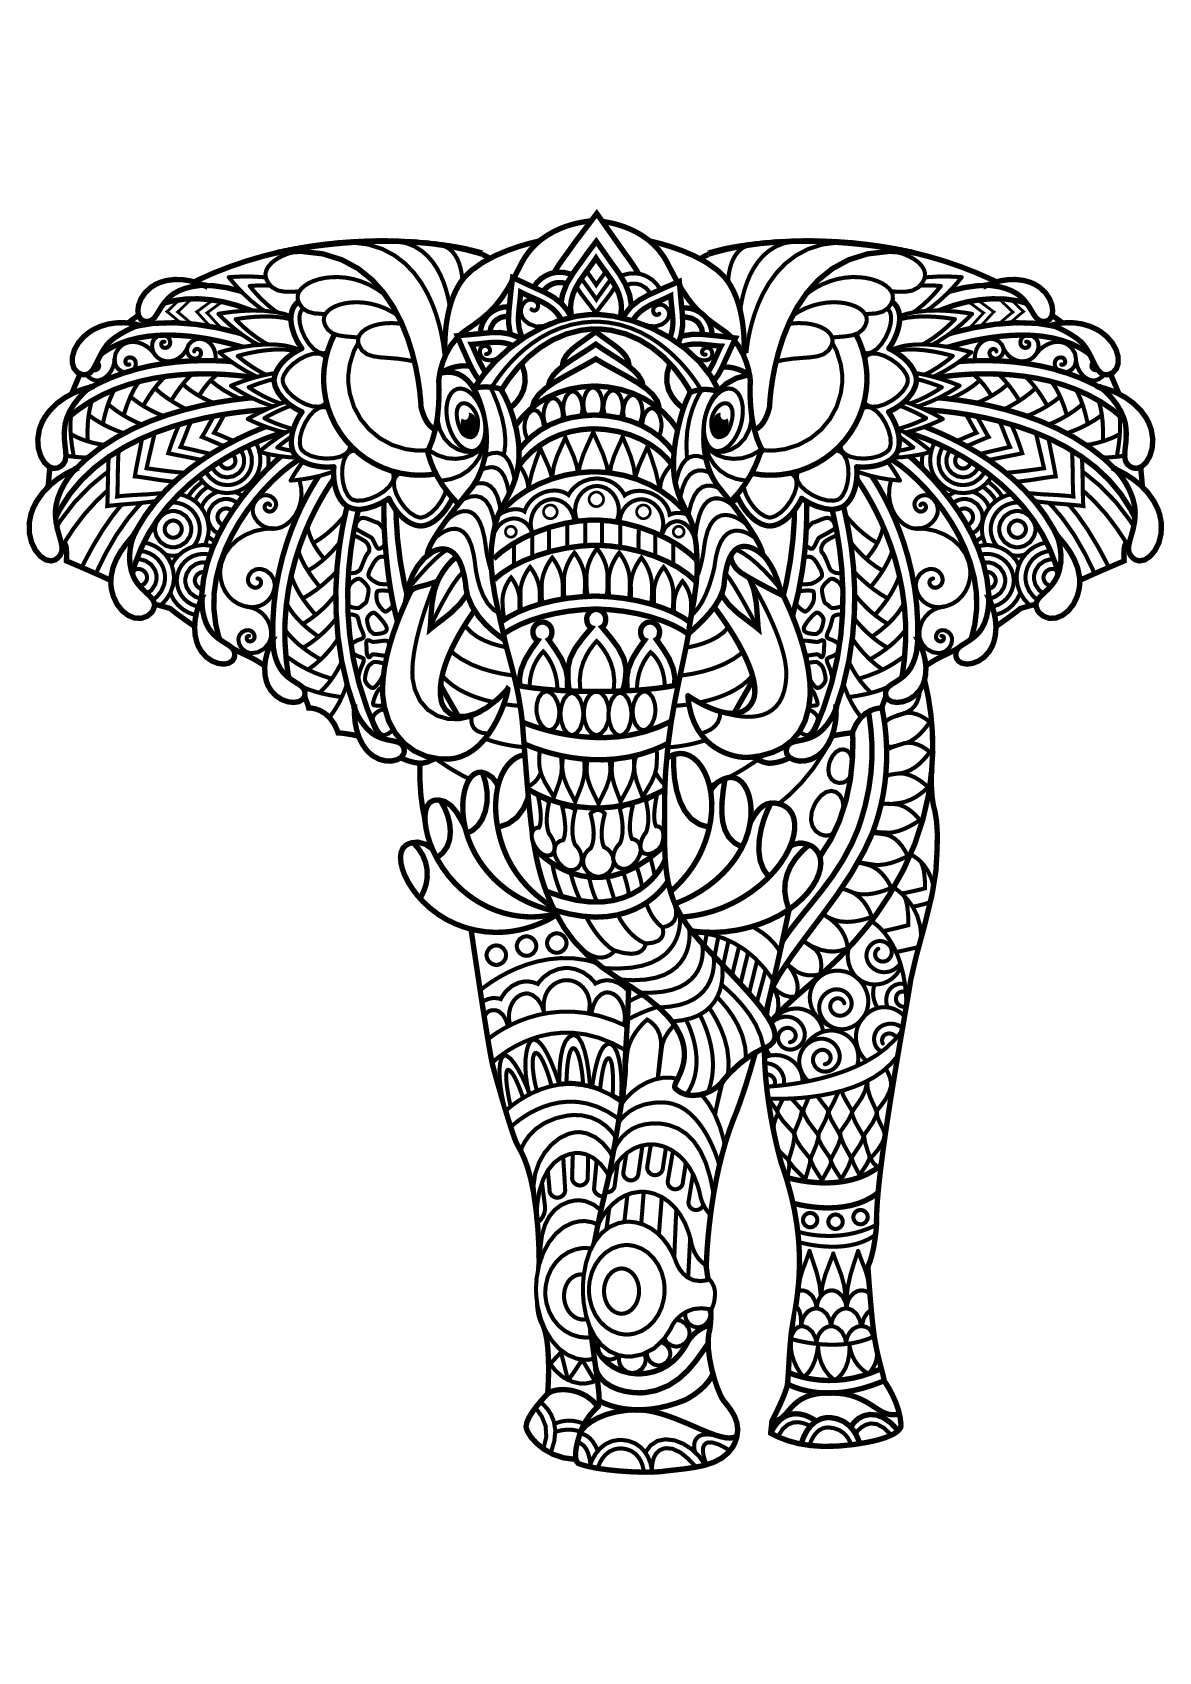 elephants-to-color-for-children-elephants-kids-coloring-pages